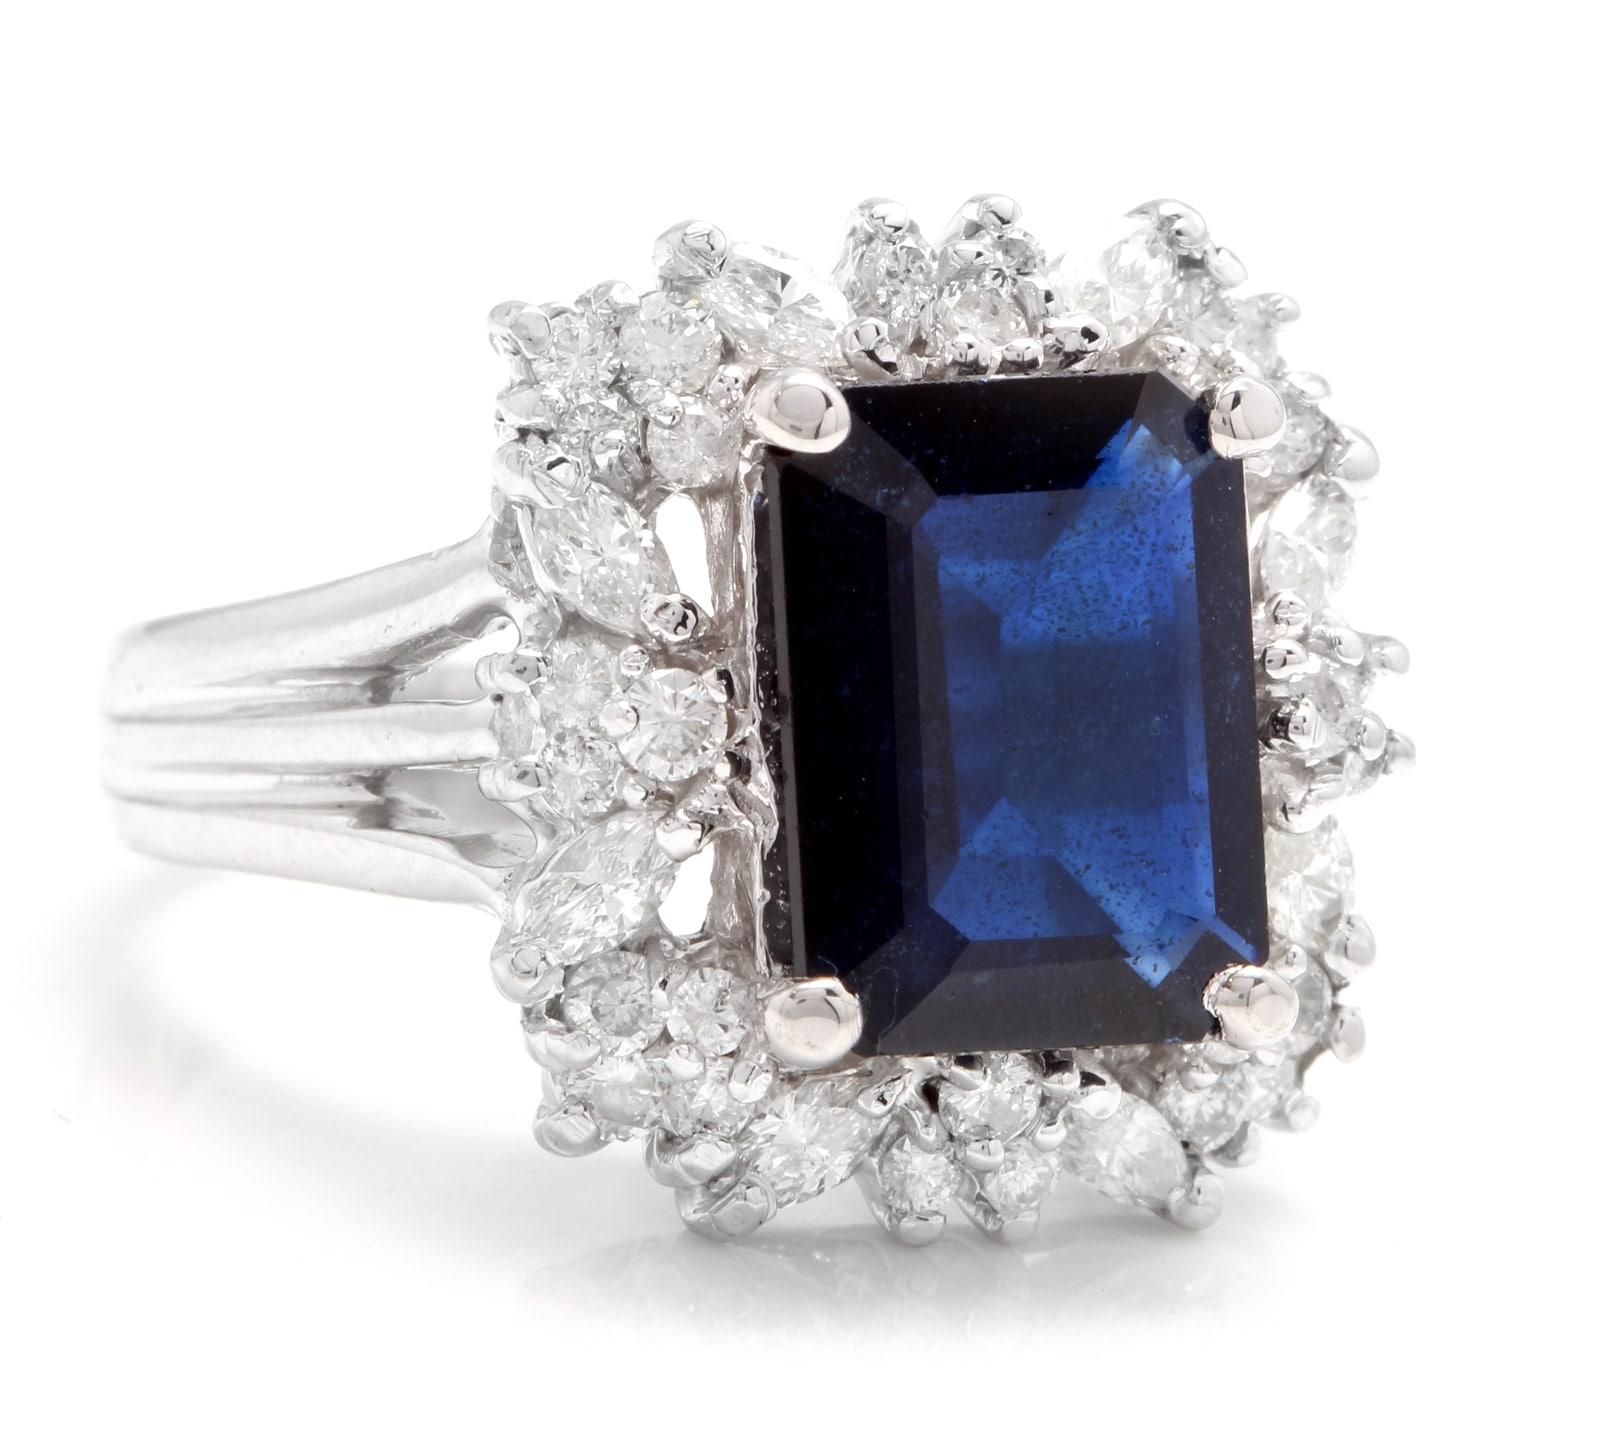 9.30 Carats Exquisite Natural Blue Sapphire and Diamond 14K Solid White Gold Ring

Total Blue Sapphire Weight is: Approx. 8.00 Carats

Sapphire Measures: Approx. 12.00 x 10.00mm

Sapphire Treatment: Diffusion

Natural Round & Marquise Diamonds